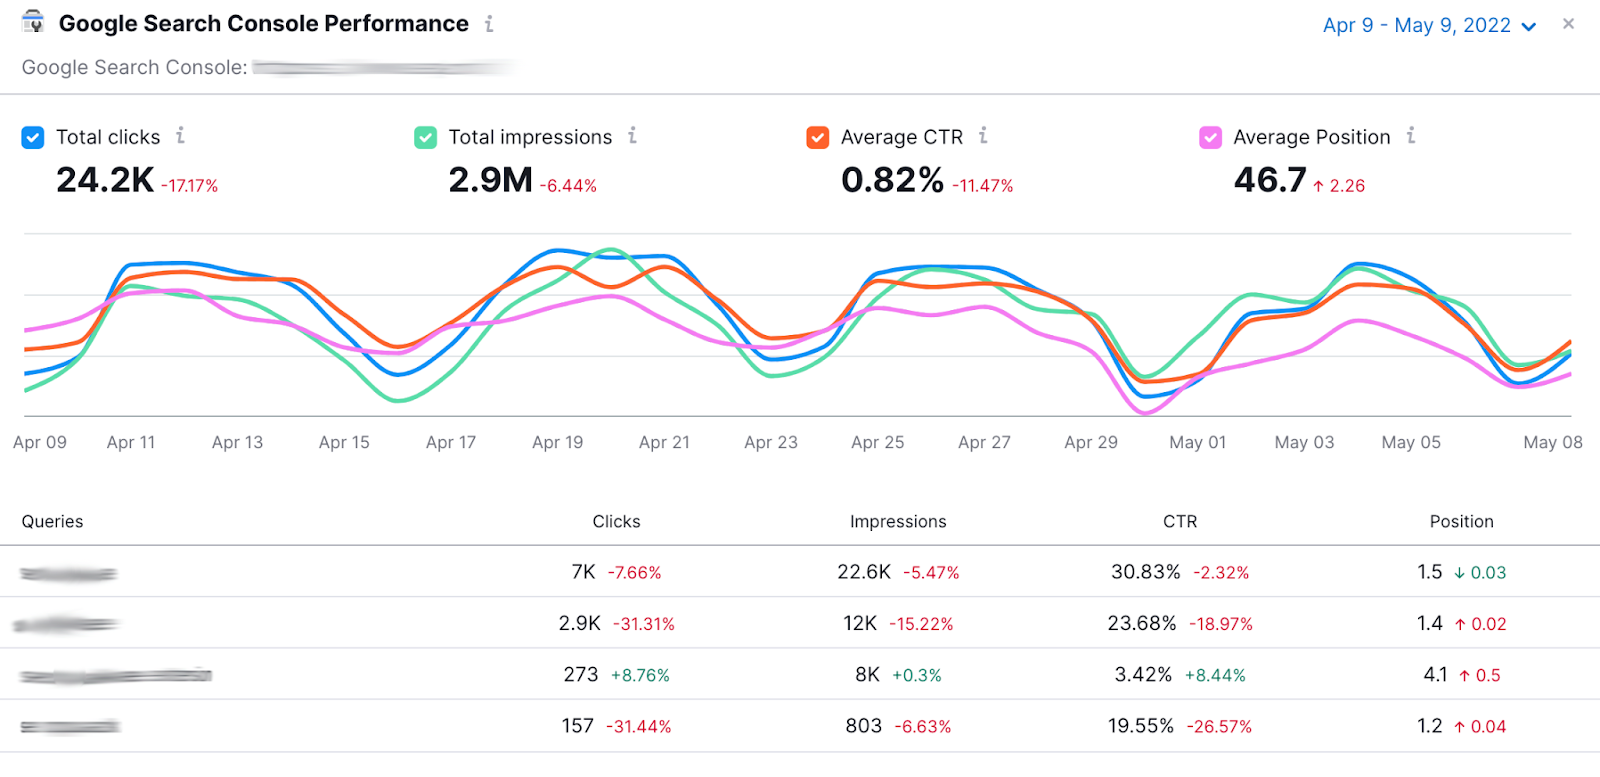 Using Semrush to see Google Search Console information